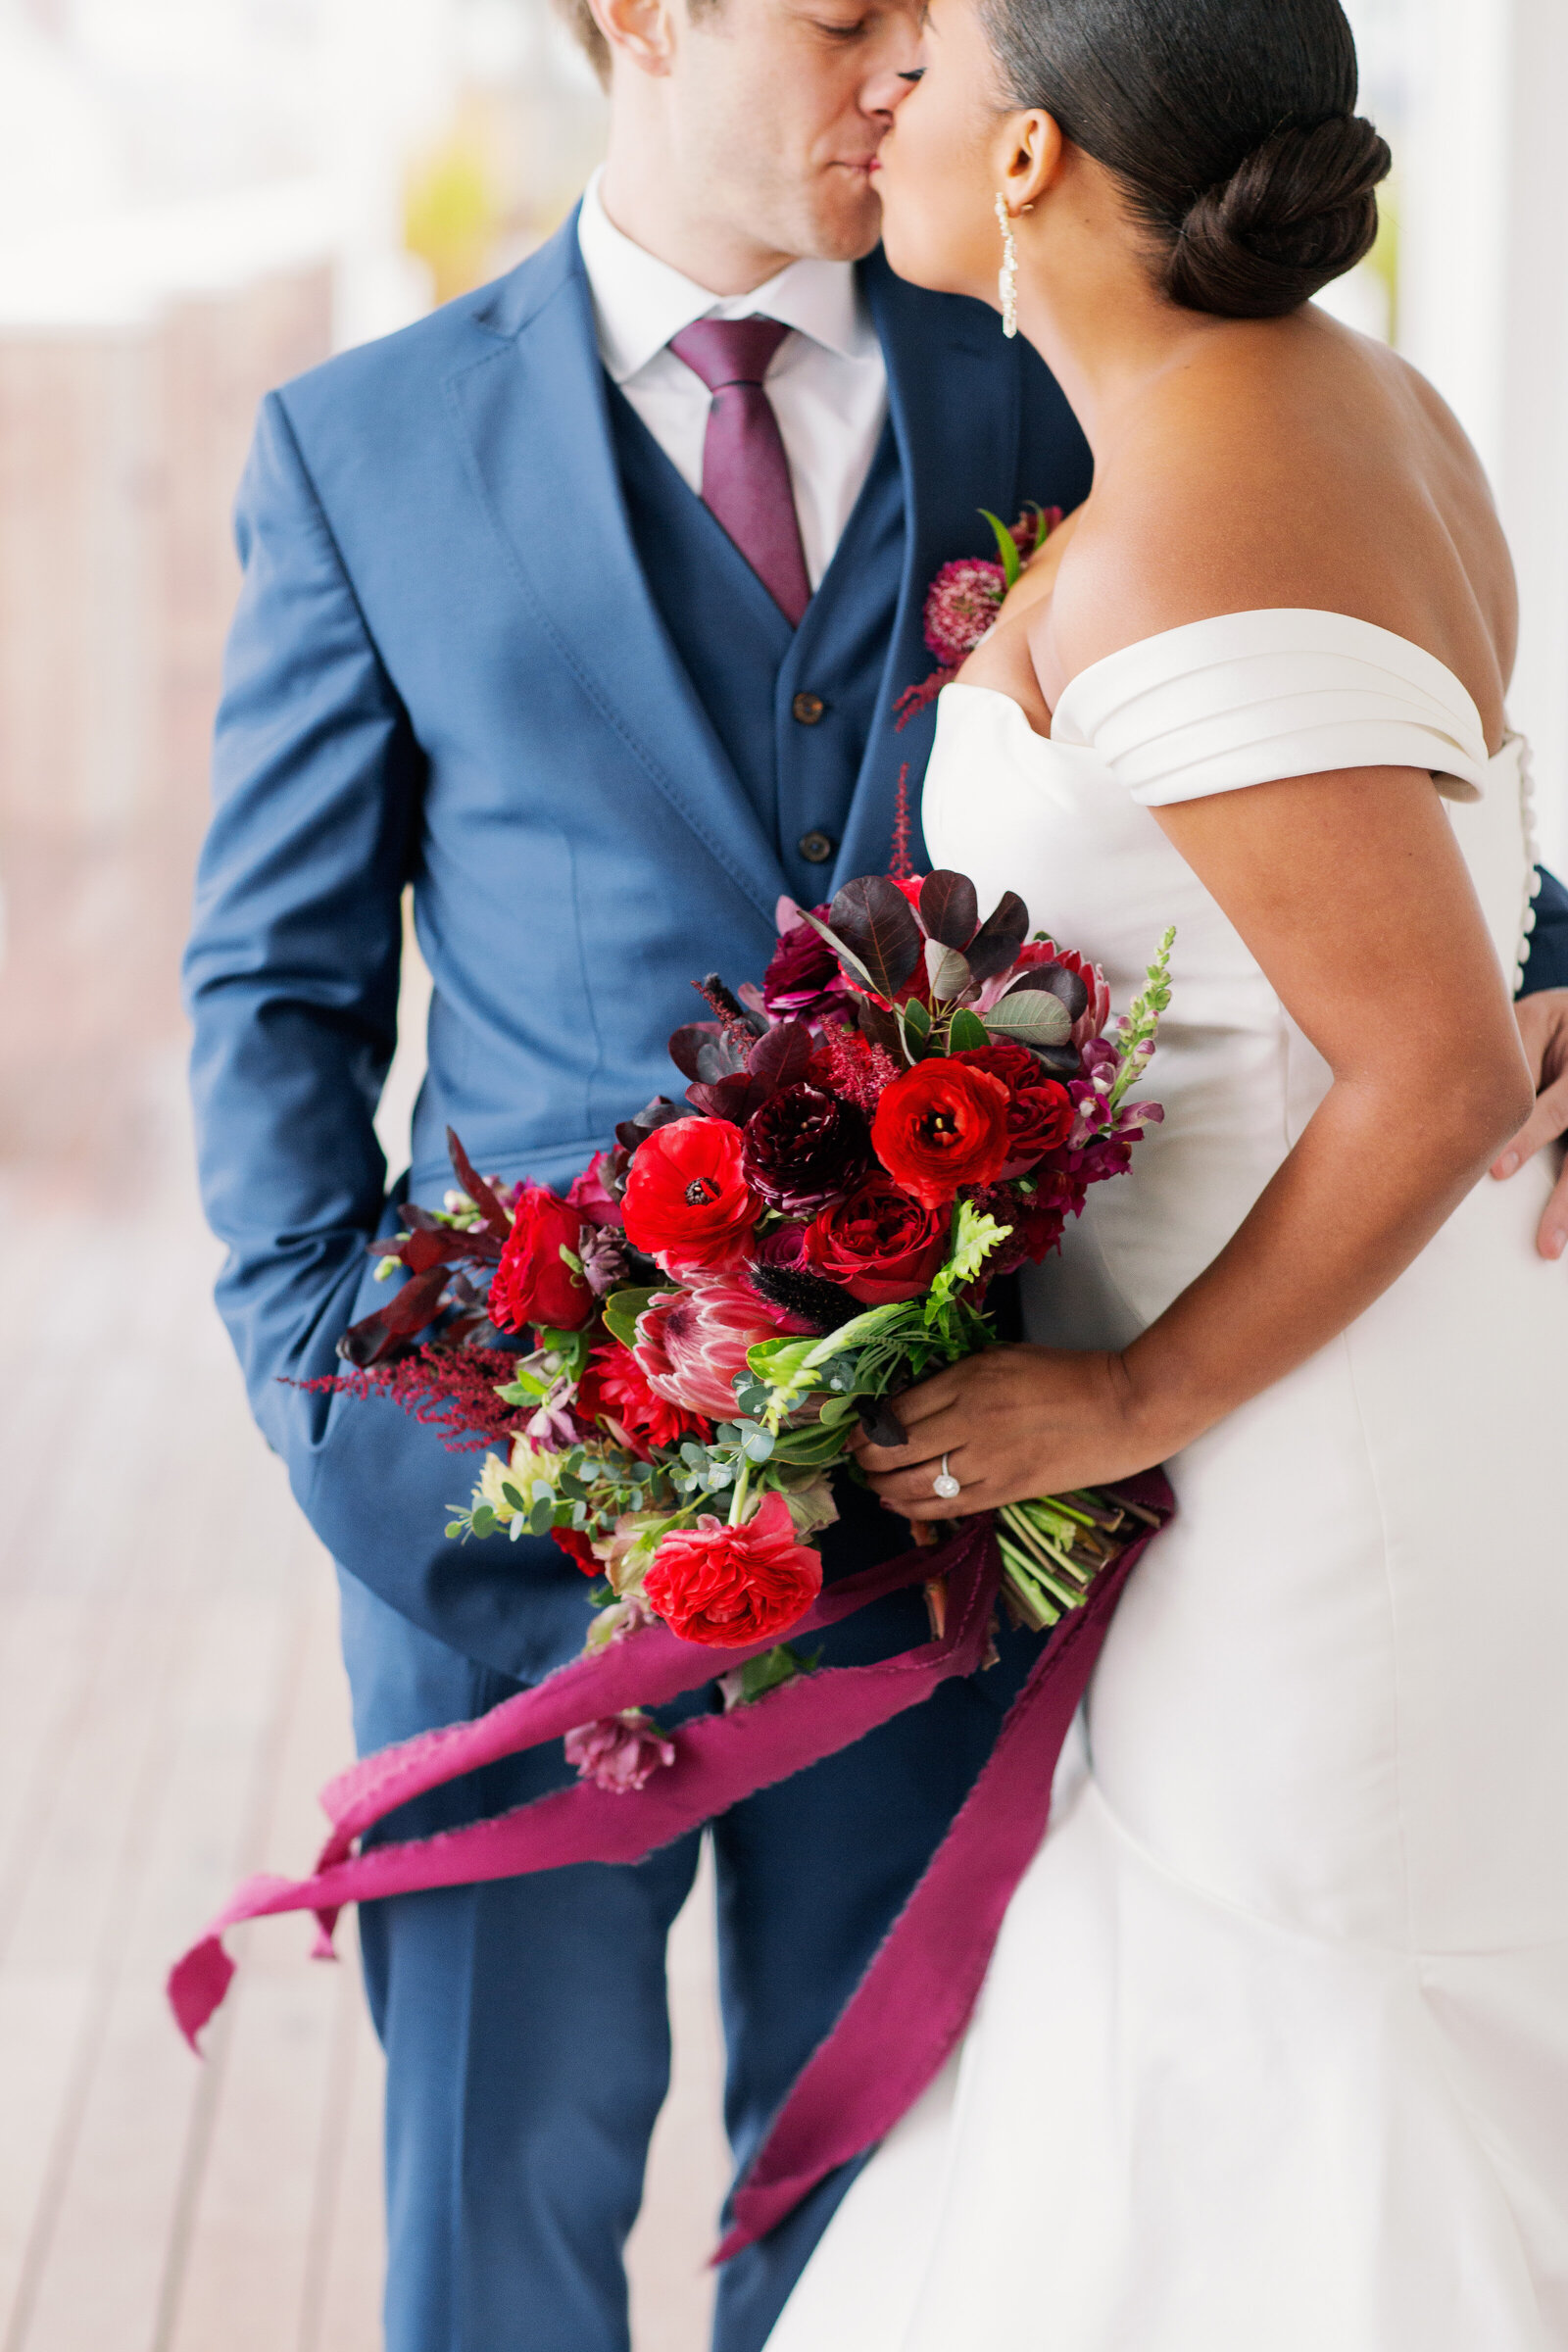 Couple kissing as one of them holds a large bouquet of flowers.